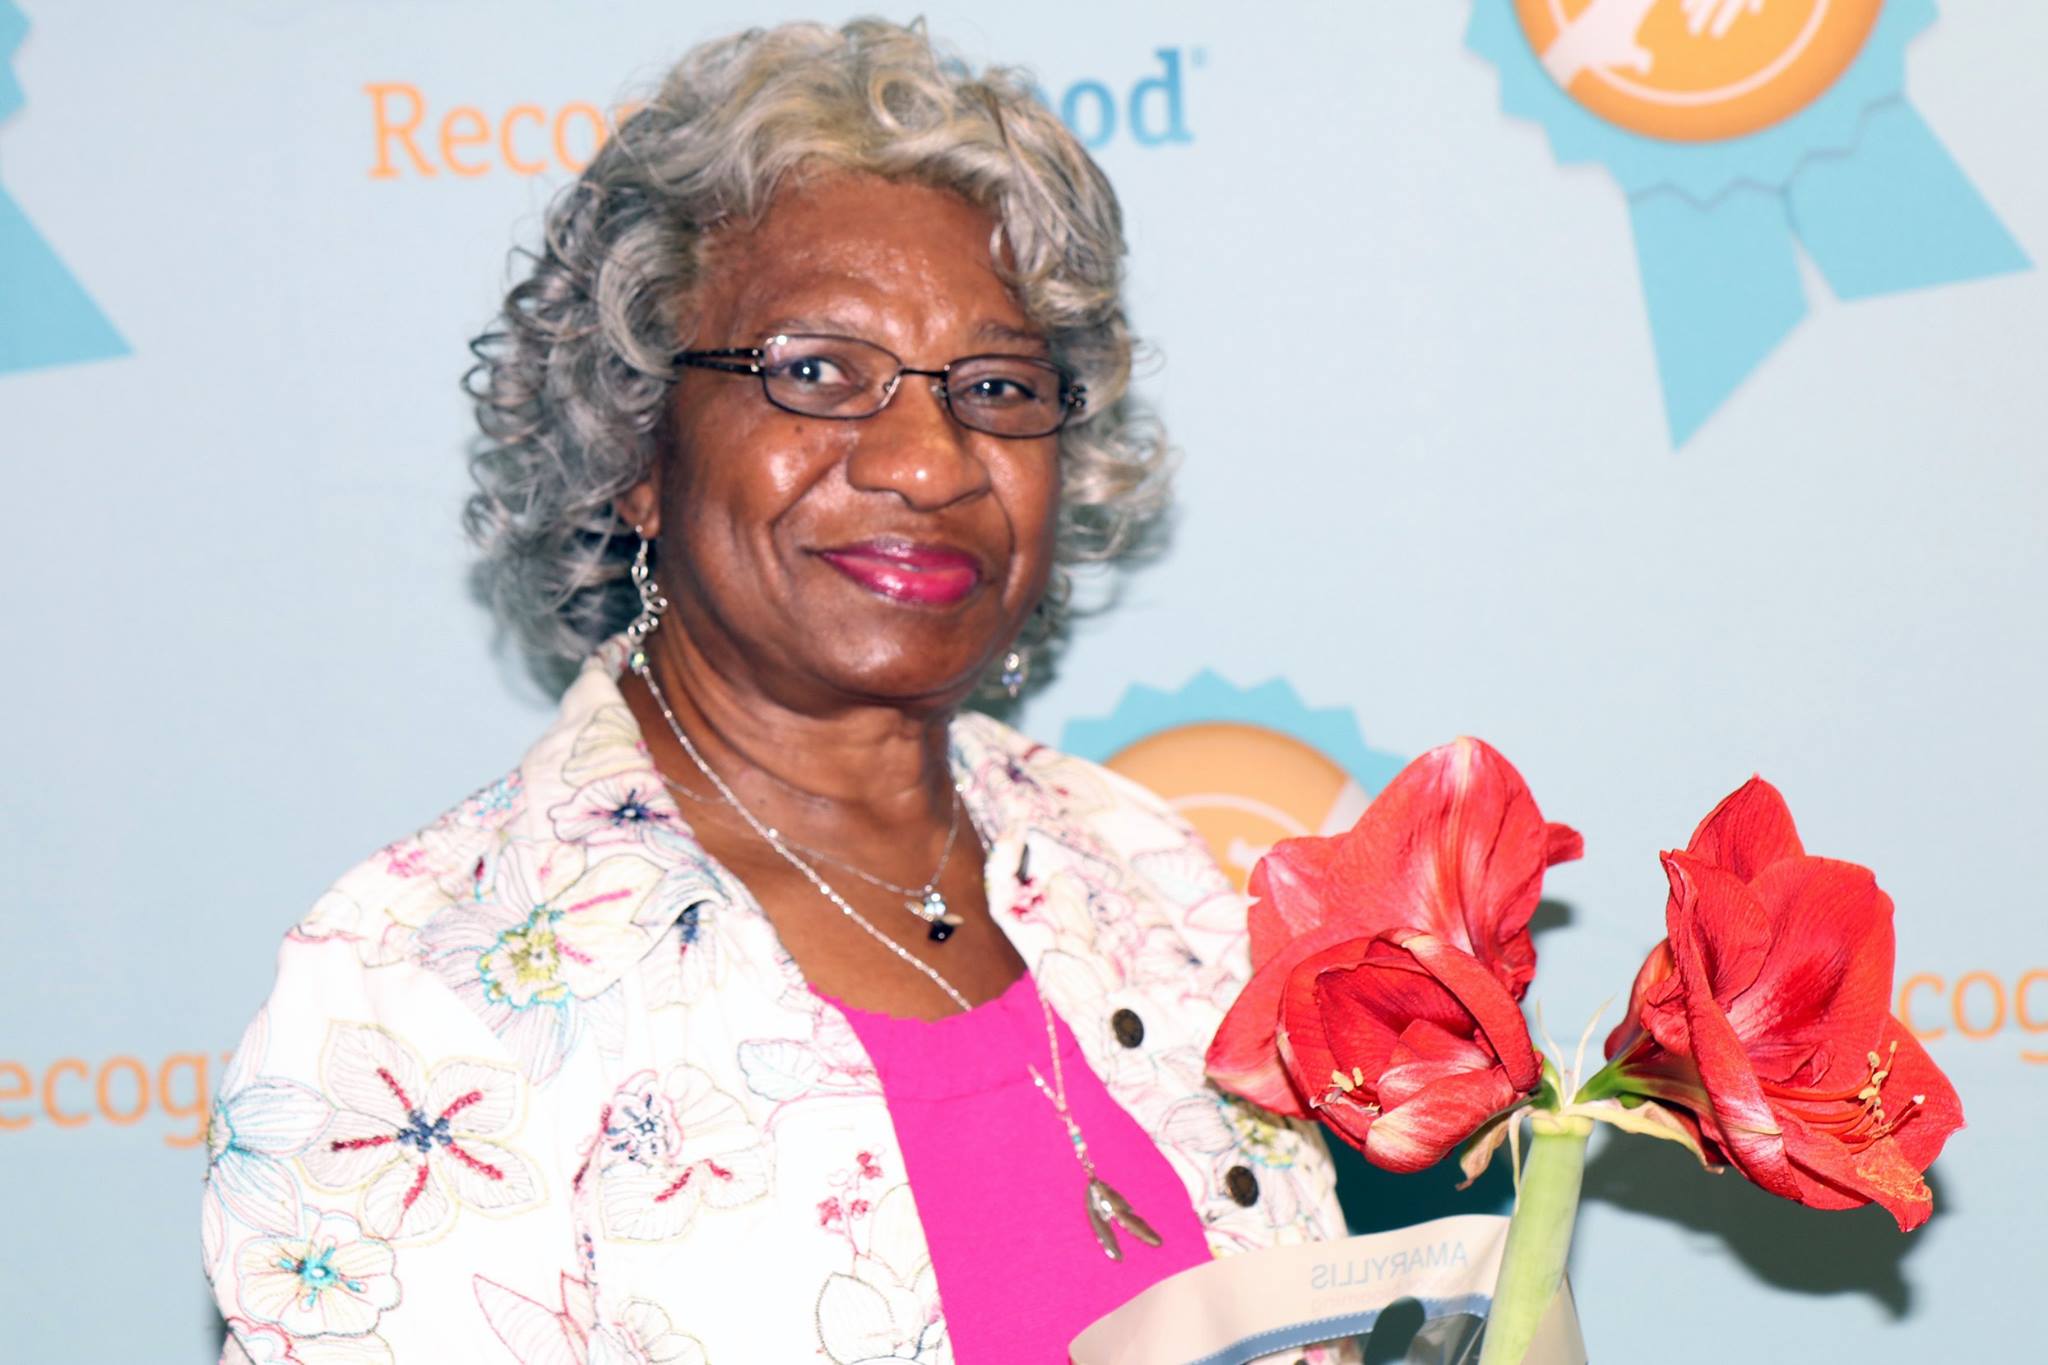 Image description: A photo of Frankie Fowler smiling at the camera. Frankie is a Black Woman with grey hair and dark-framed glasses. She is wearing a white top with a lovely flower pattern on it. Beautiful red flowers are in the foreground.